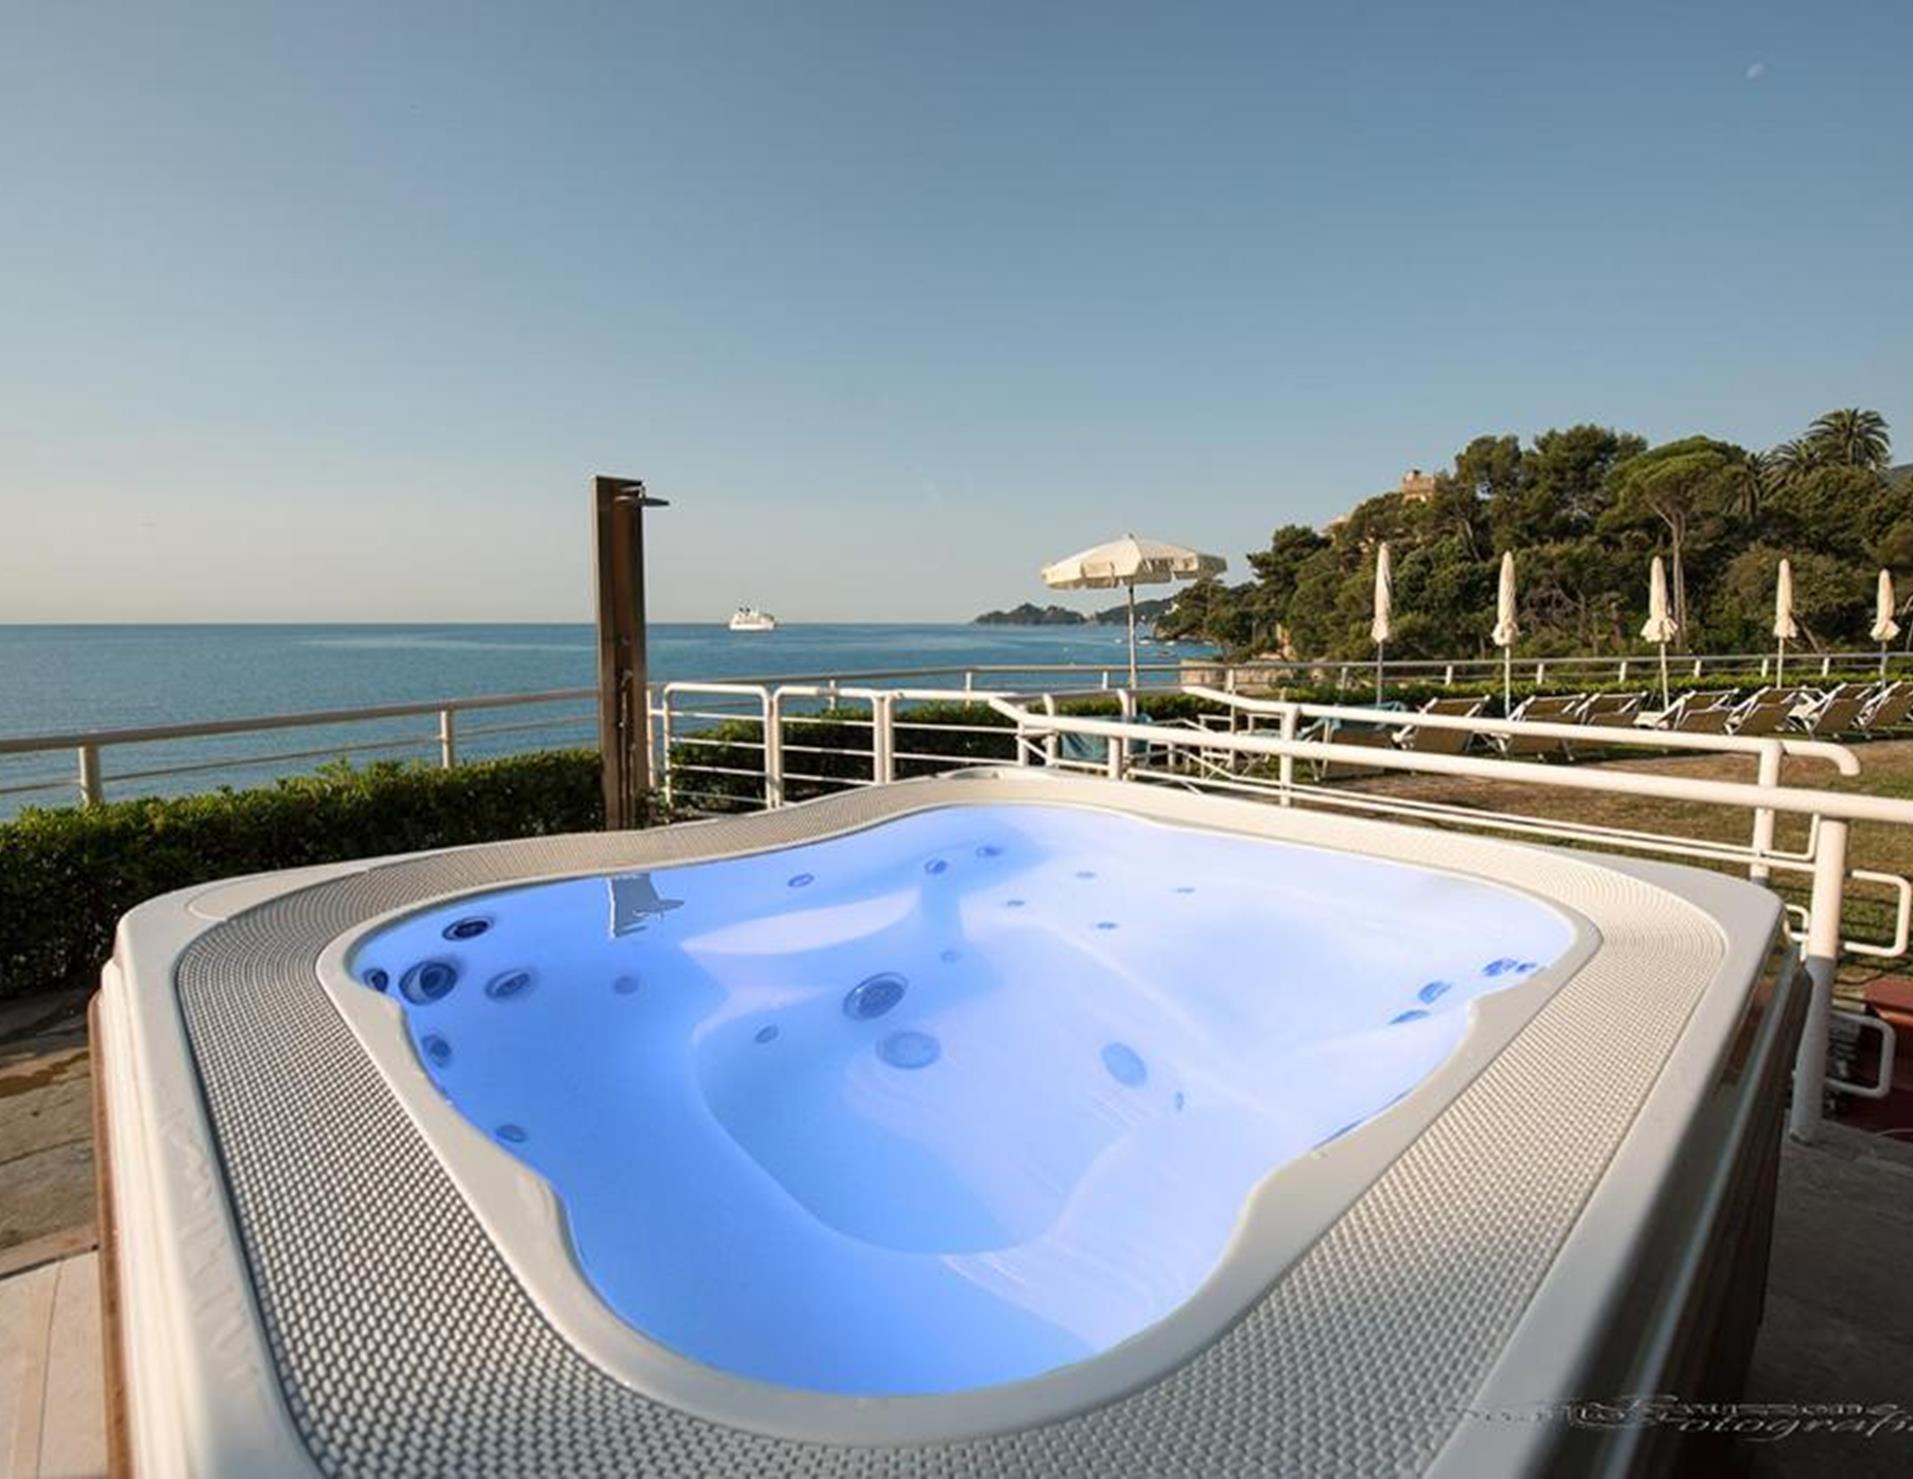 Excelsior Palace Hotel - Jacuzzi